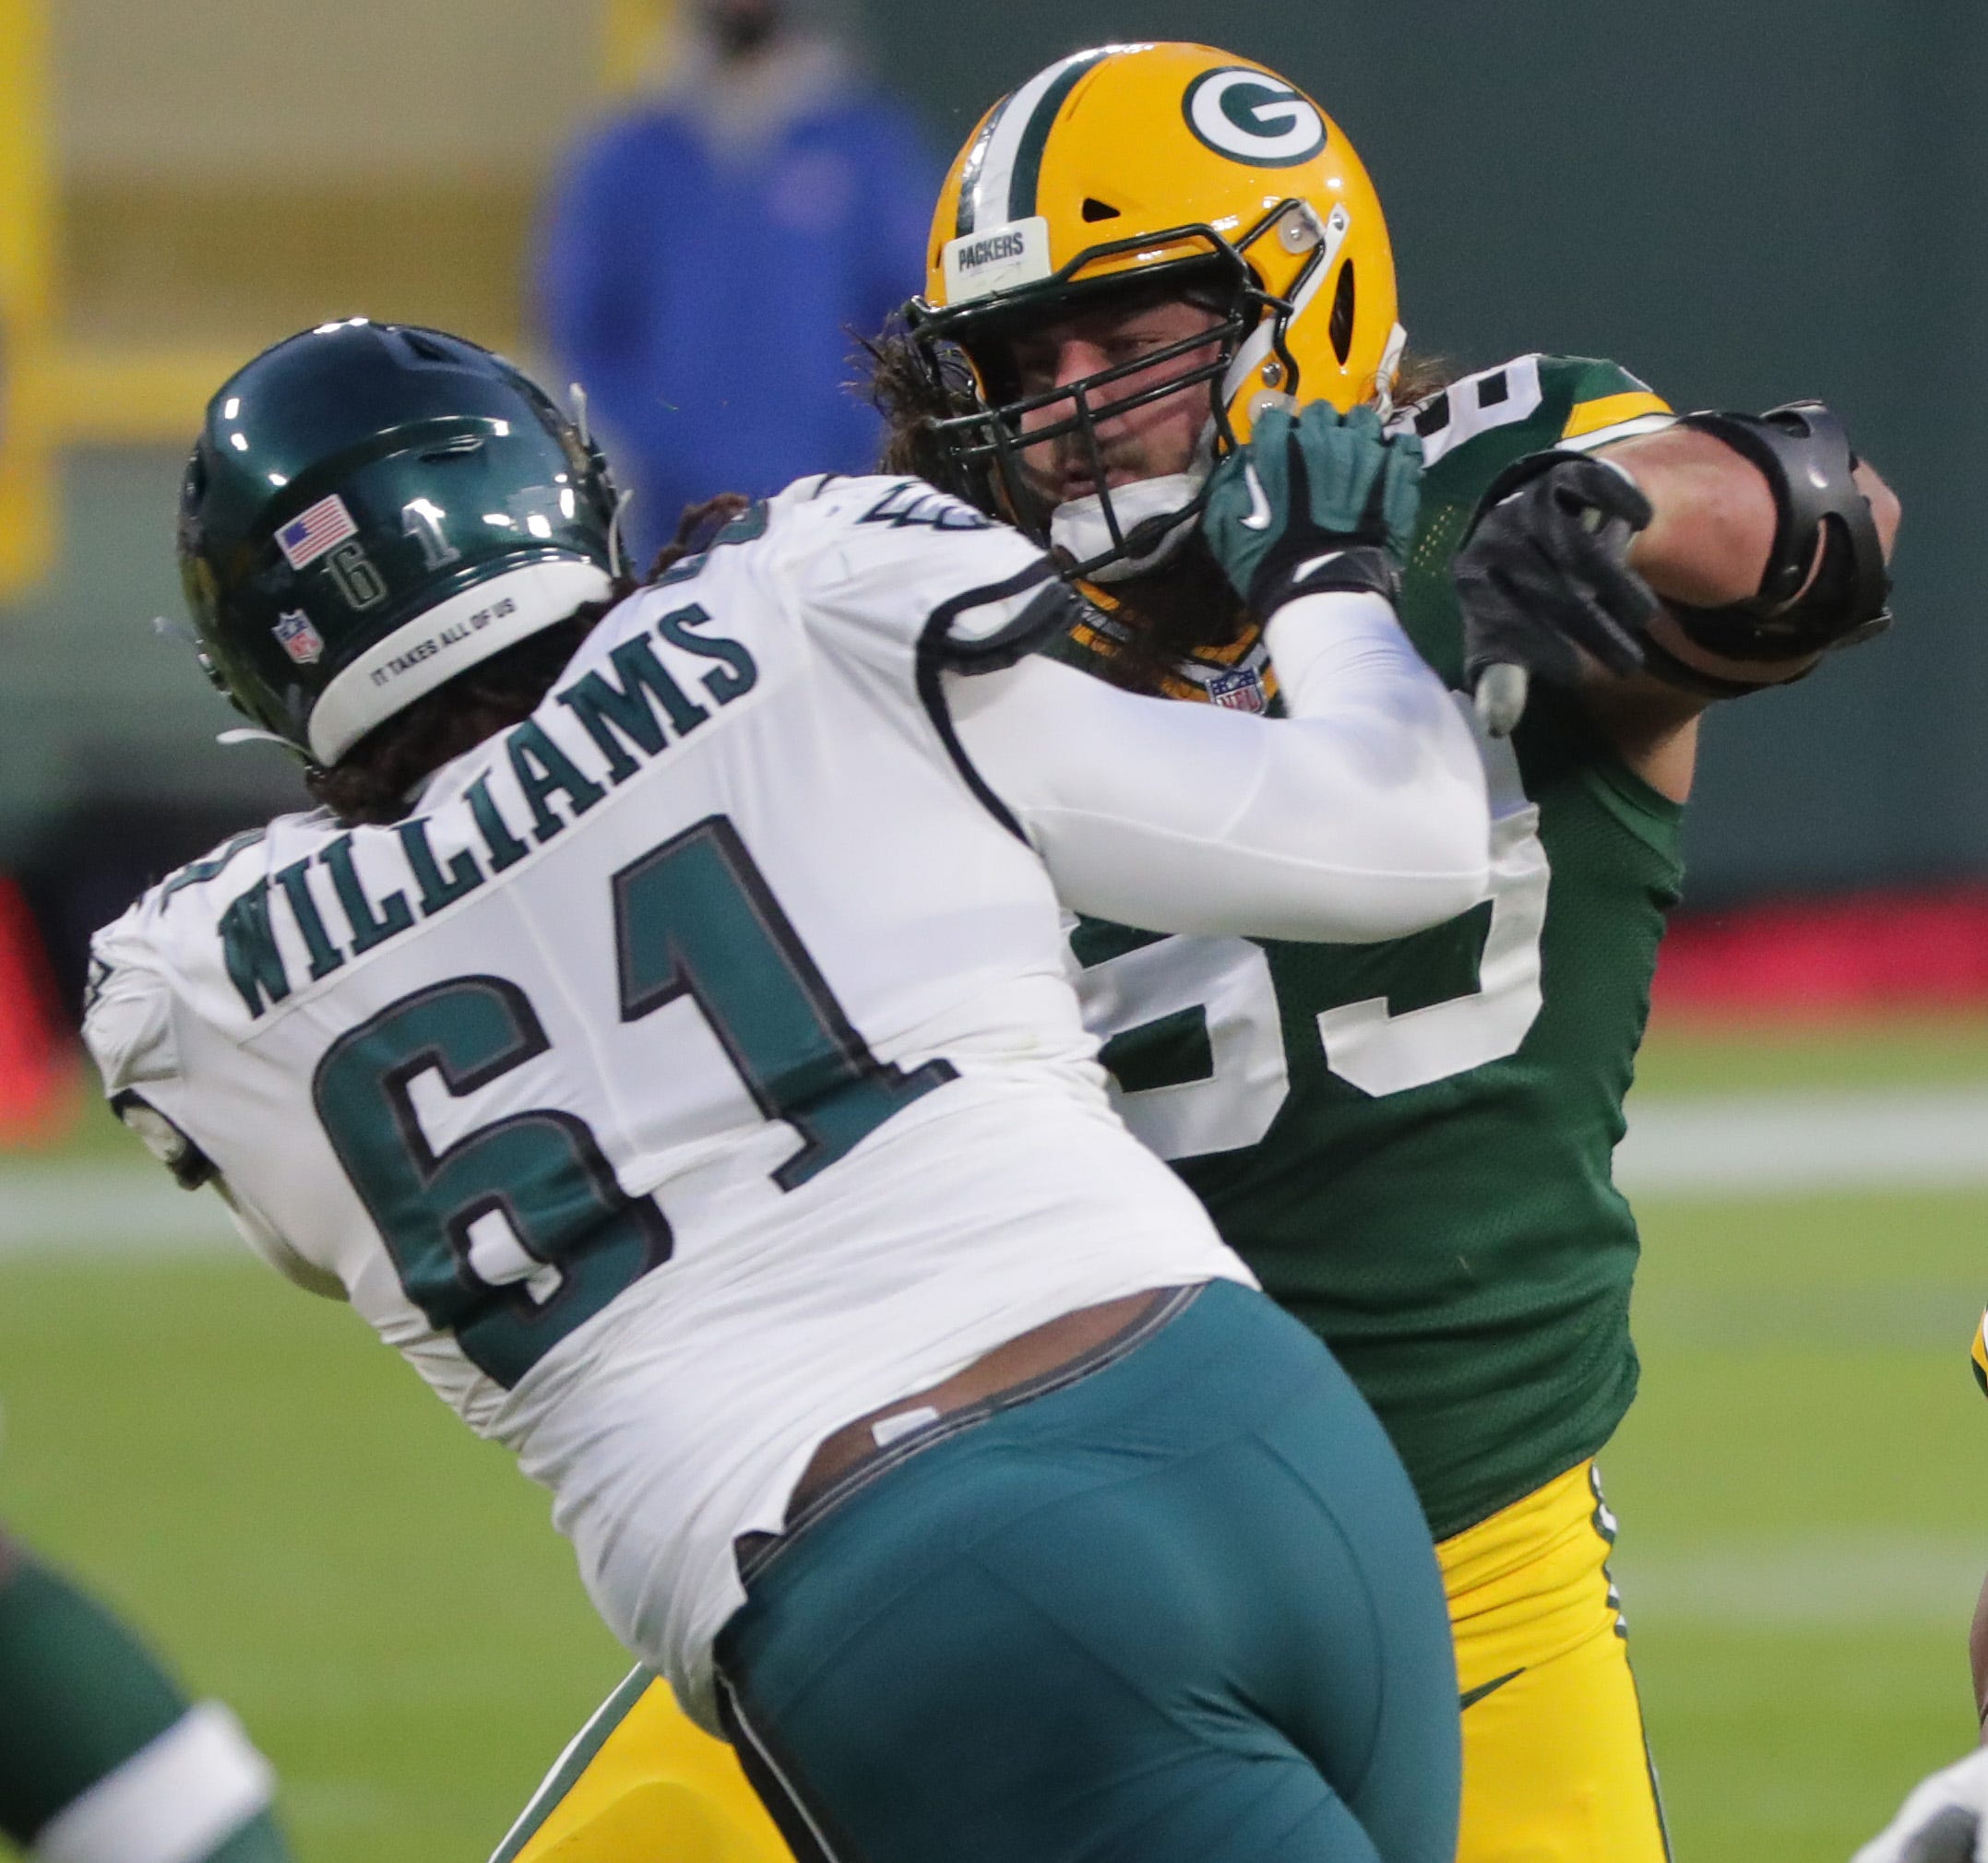 Green Bay Packers offensive tackle David Bakhtiari (69) blocks Philadelphia Eagles defensive tackle Raequan Williams (61) during the second quarter of their game Sunday, December 6, 2020 at Lambeau Field in Green Bay, Wis.